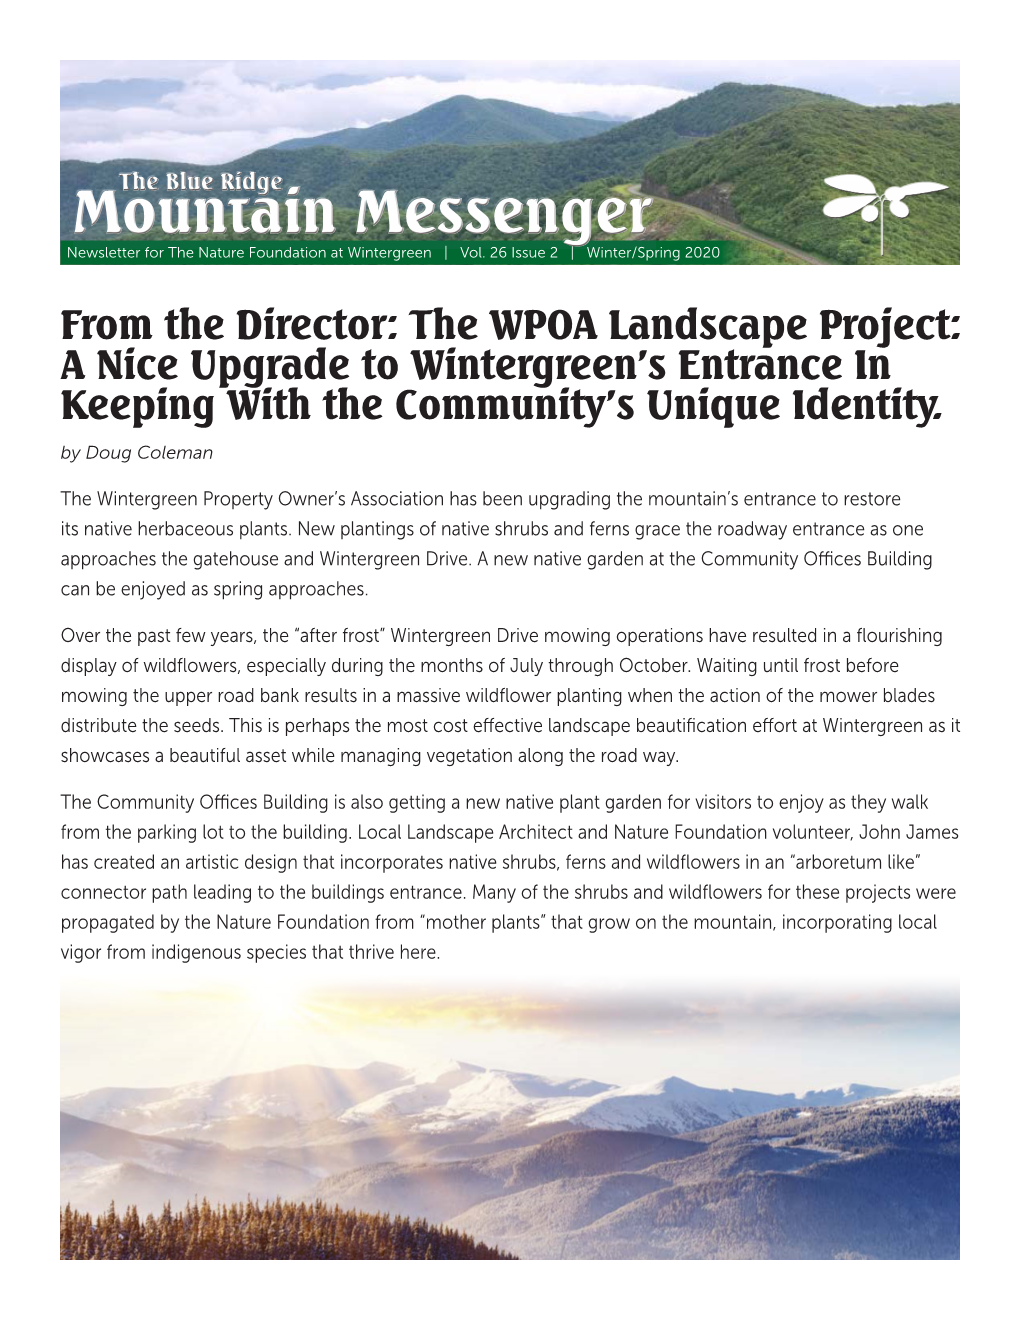 The WPOA Landscape Project: a Nice Upgrade to Wintergreen’S Entrance in Keeping with the Community’S Unique Identity